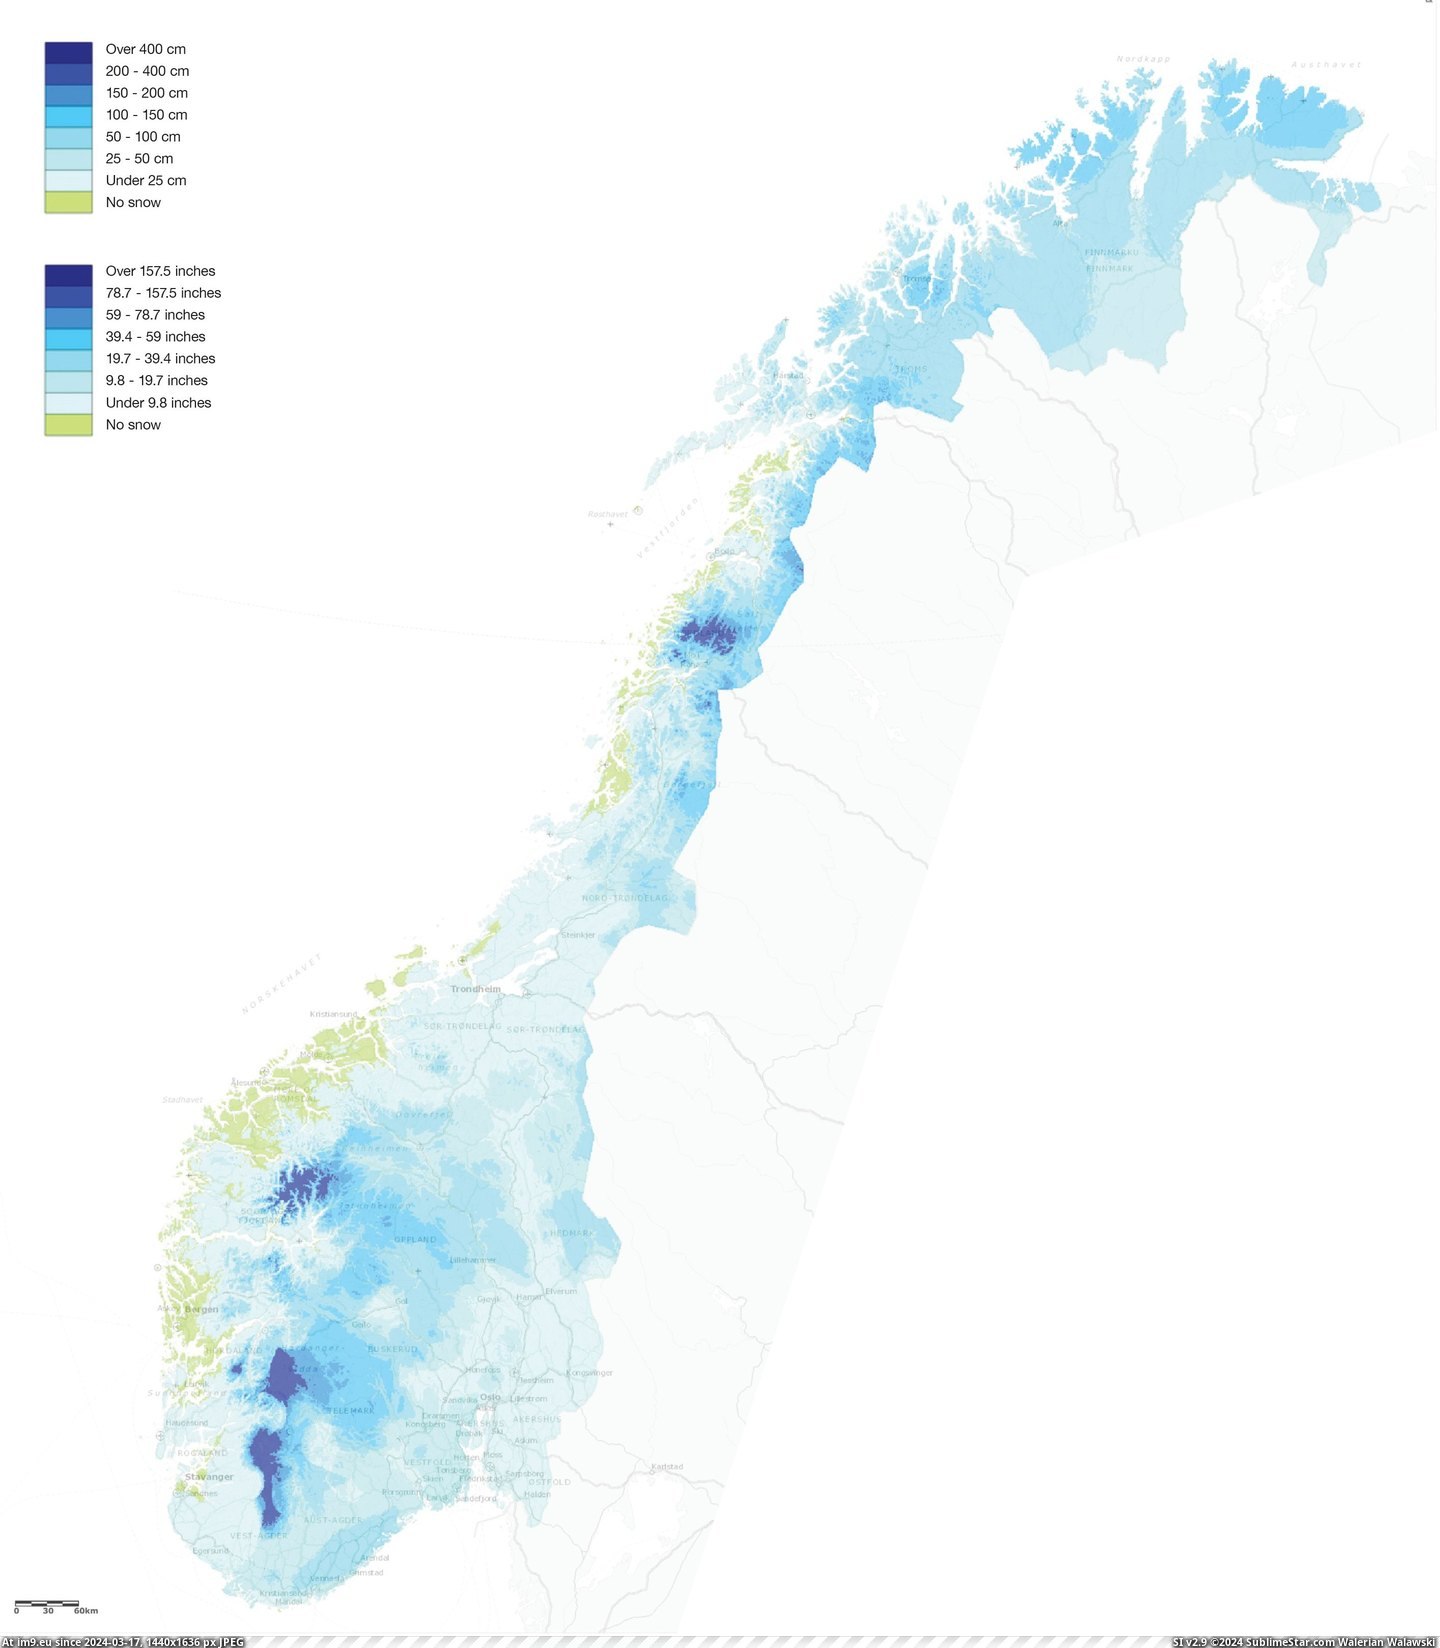 #Snow #Current #Depth #Norway [Dataisbeautiful] Current snow depth in Norway Pic. (Image of album My r/DATAISBEAUTIFUL favs))